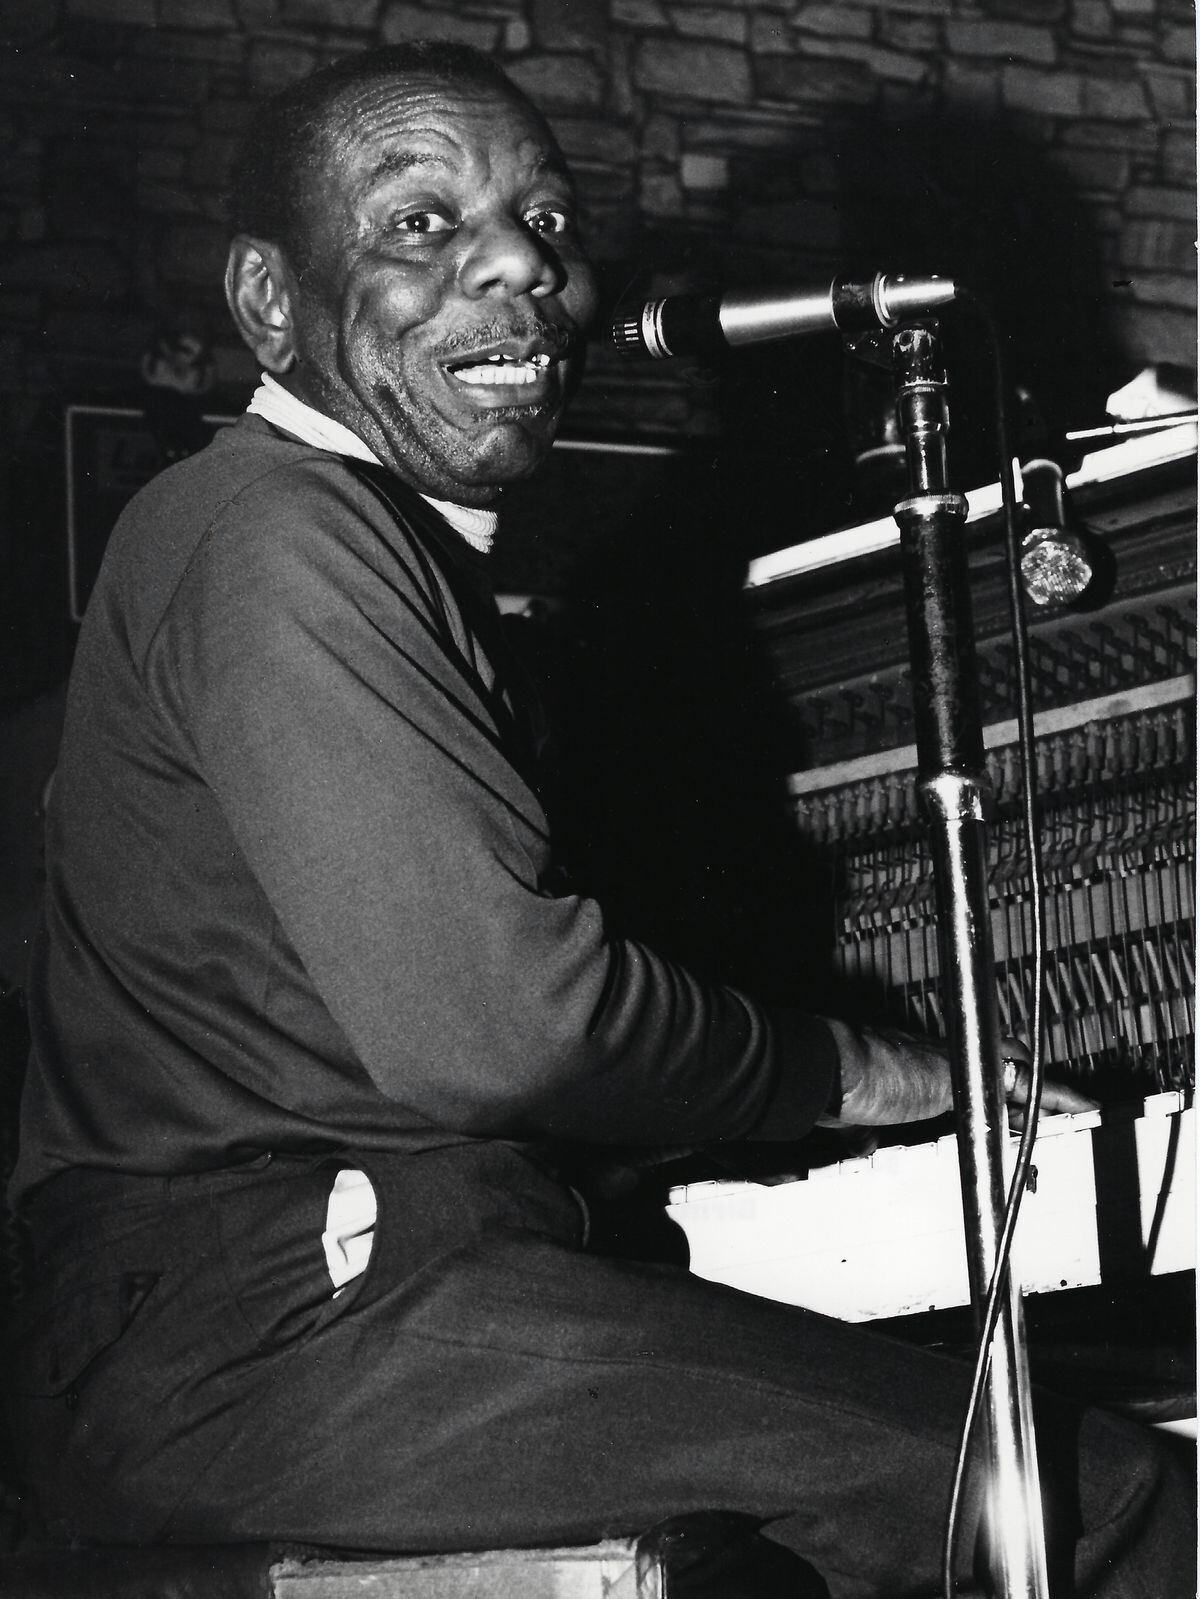 American blues and boogie-woogie pianist and singer Champion Jack Dupree